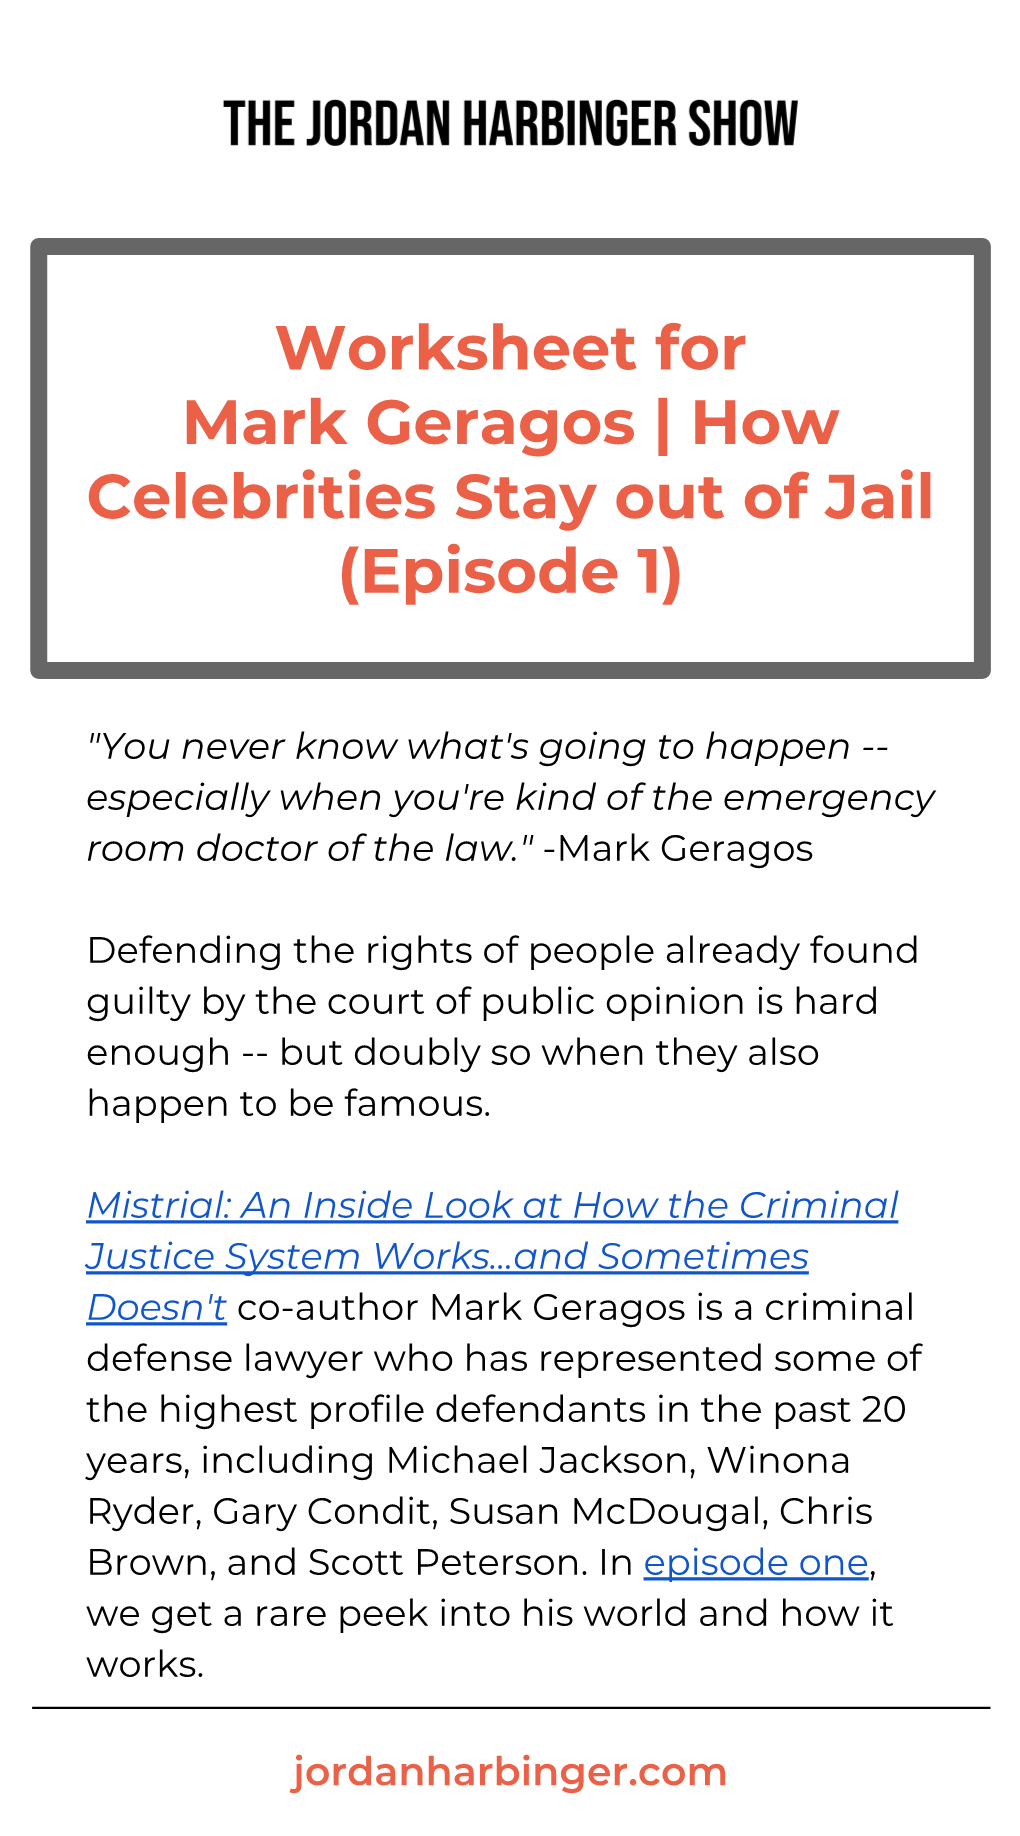 Worksheet for Mark Geragos | How Celebrities Stay out of Jail (Episode 1)